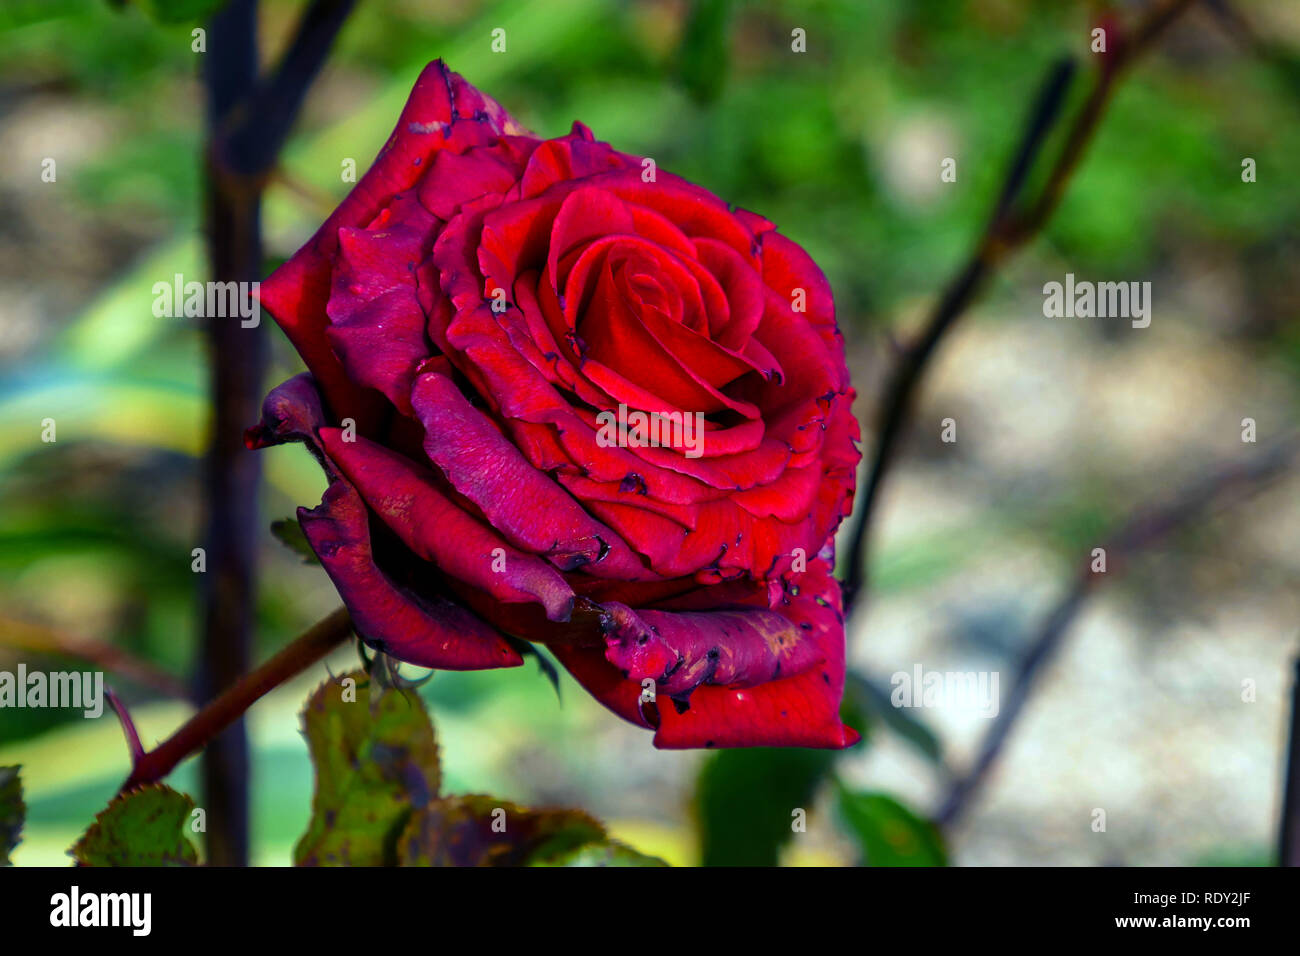 Single red rose past its best, looking tatty and old Stock Photo